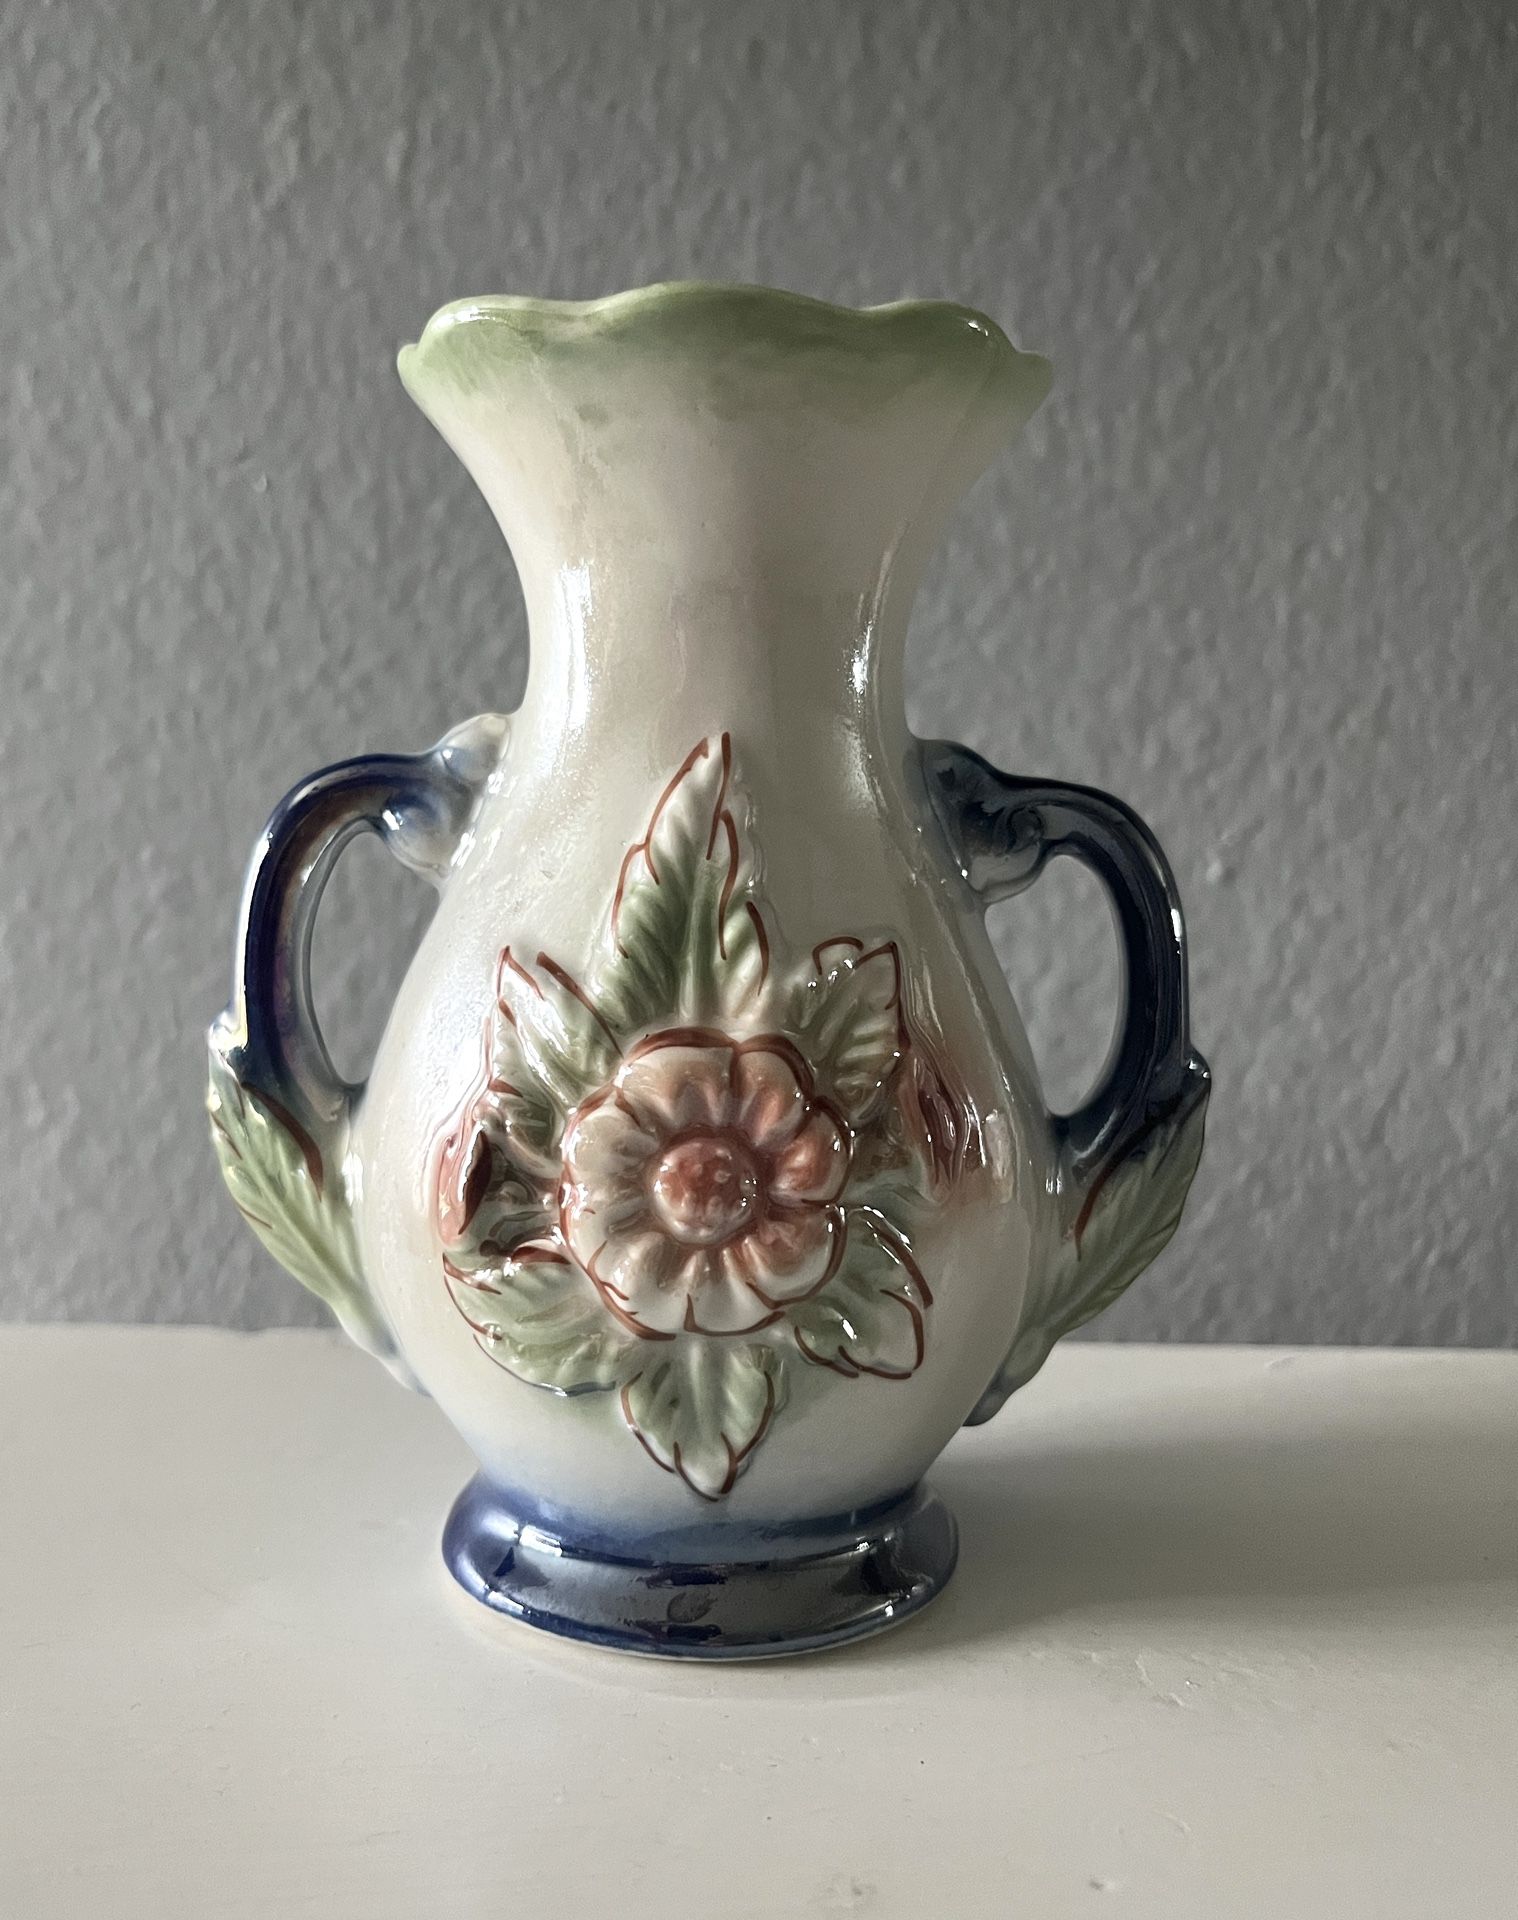  Vintage Lusterware hand painted floral vase. Double handles. Made in Brazil. 